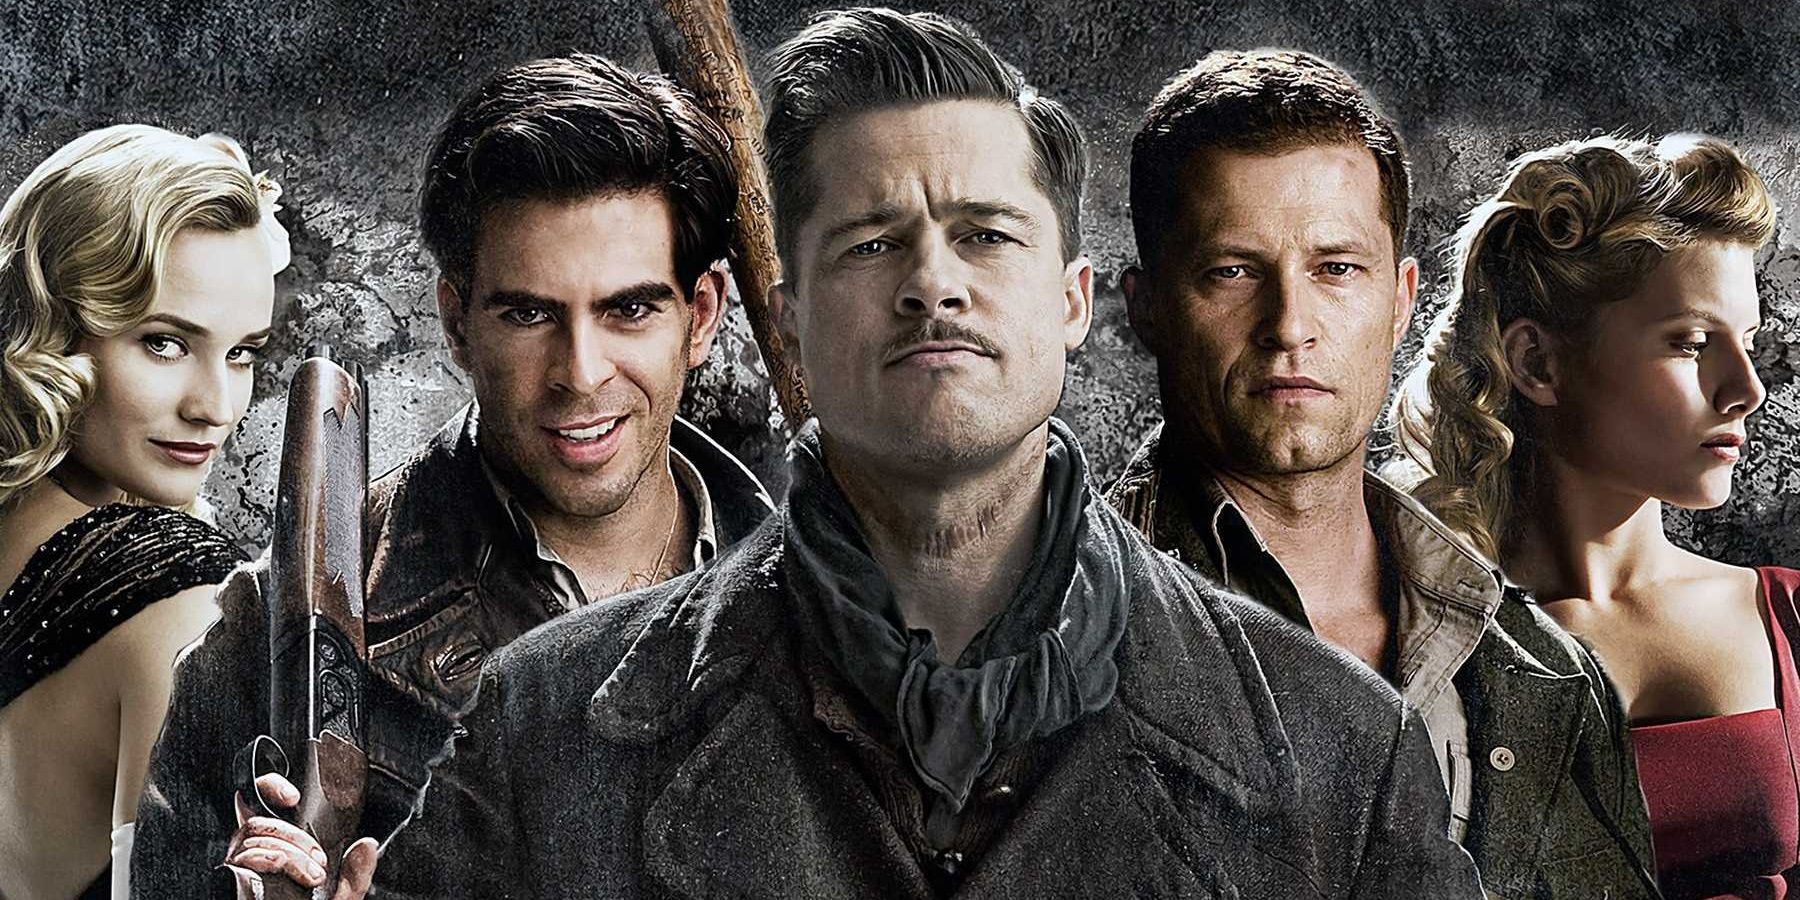 The cast of Inglourious Basterds